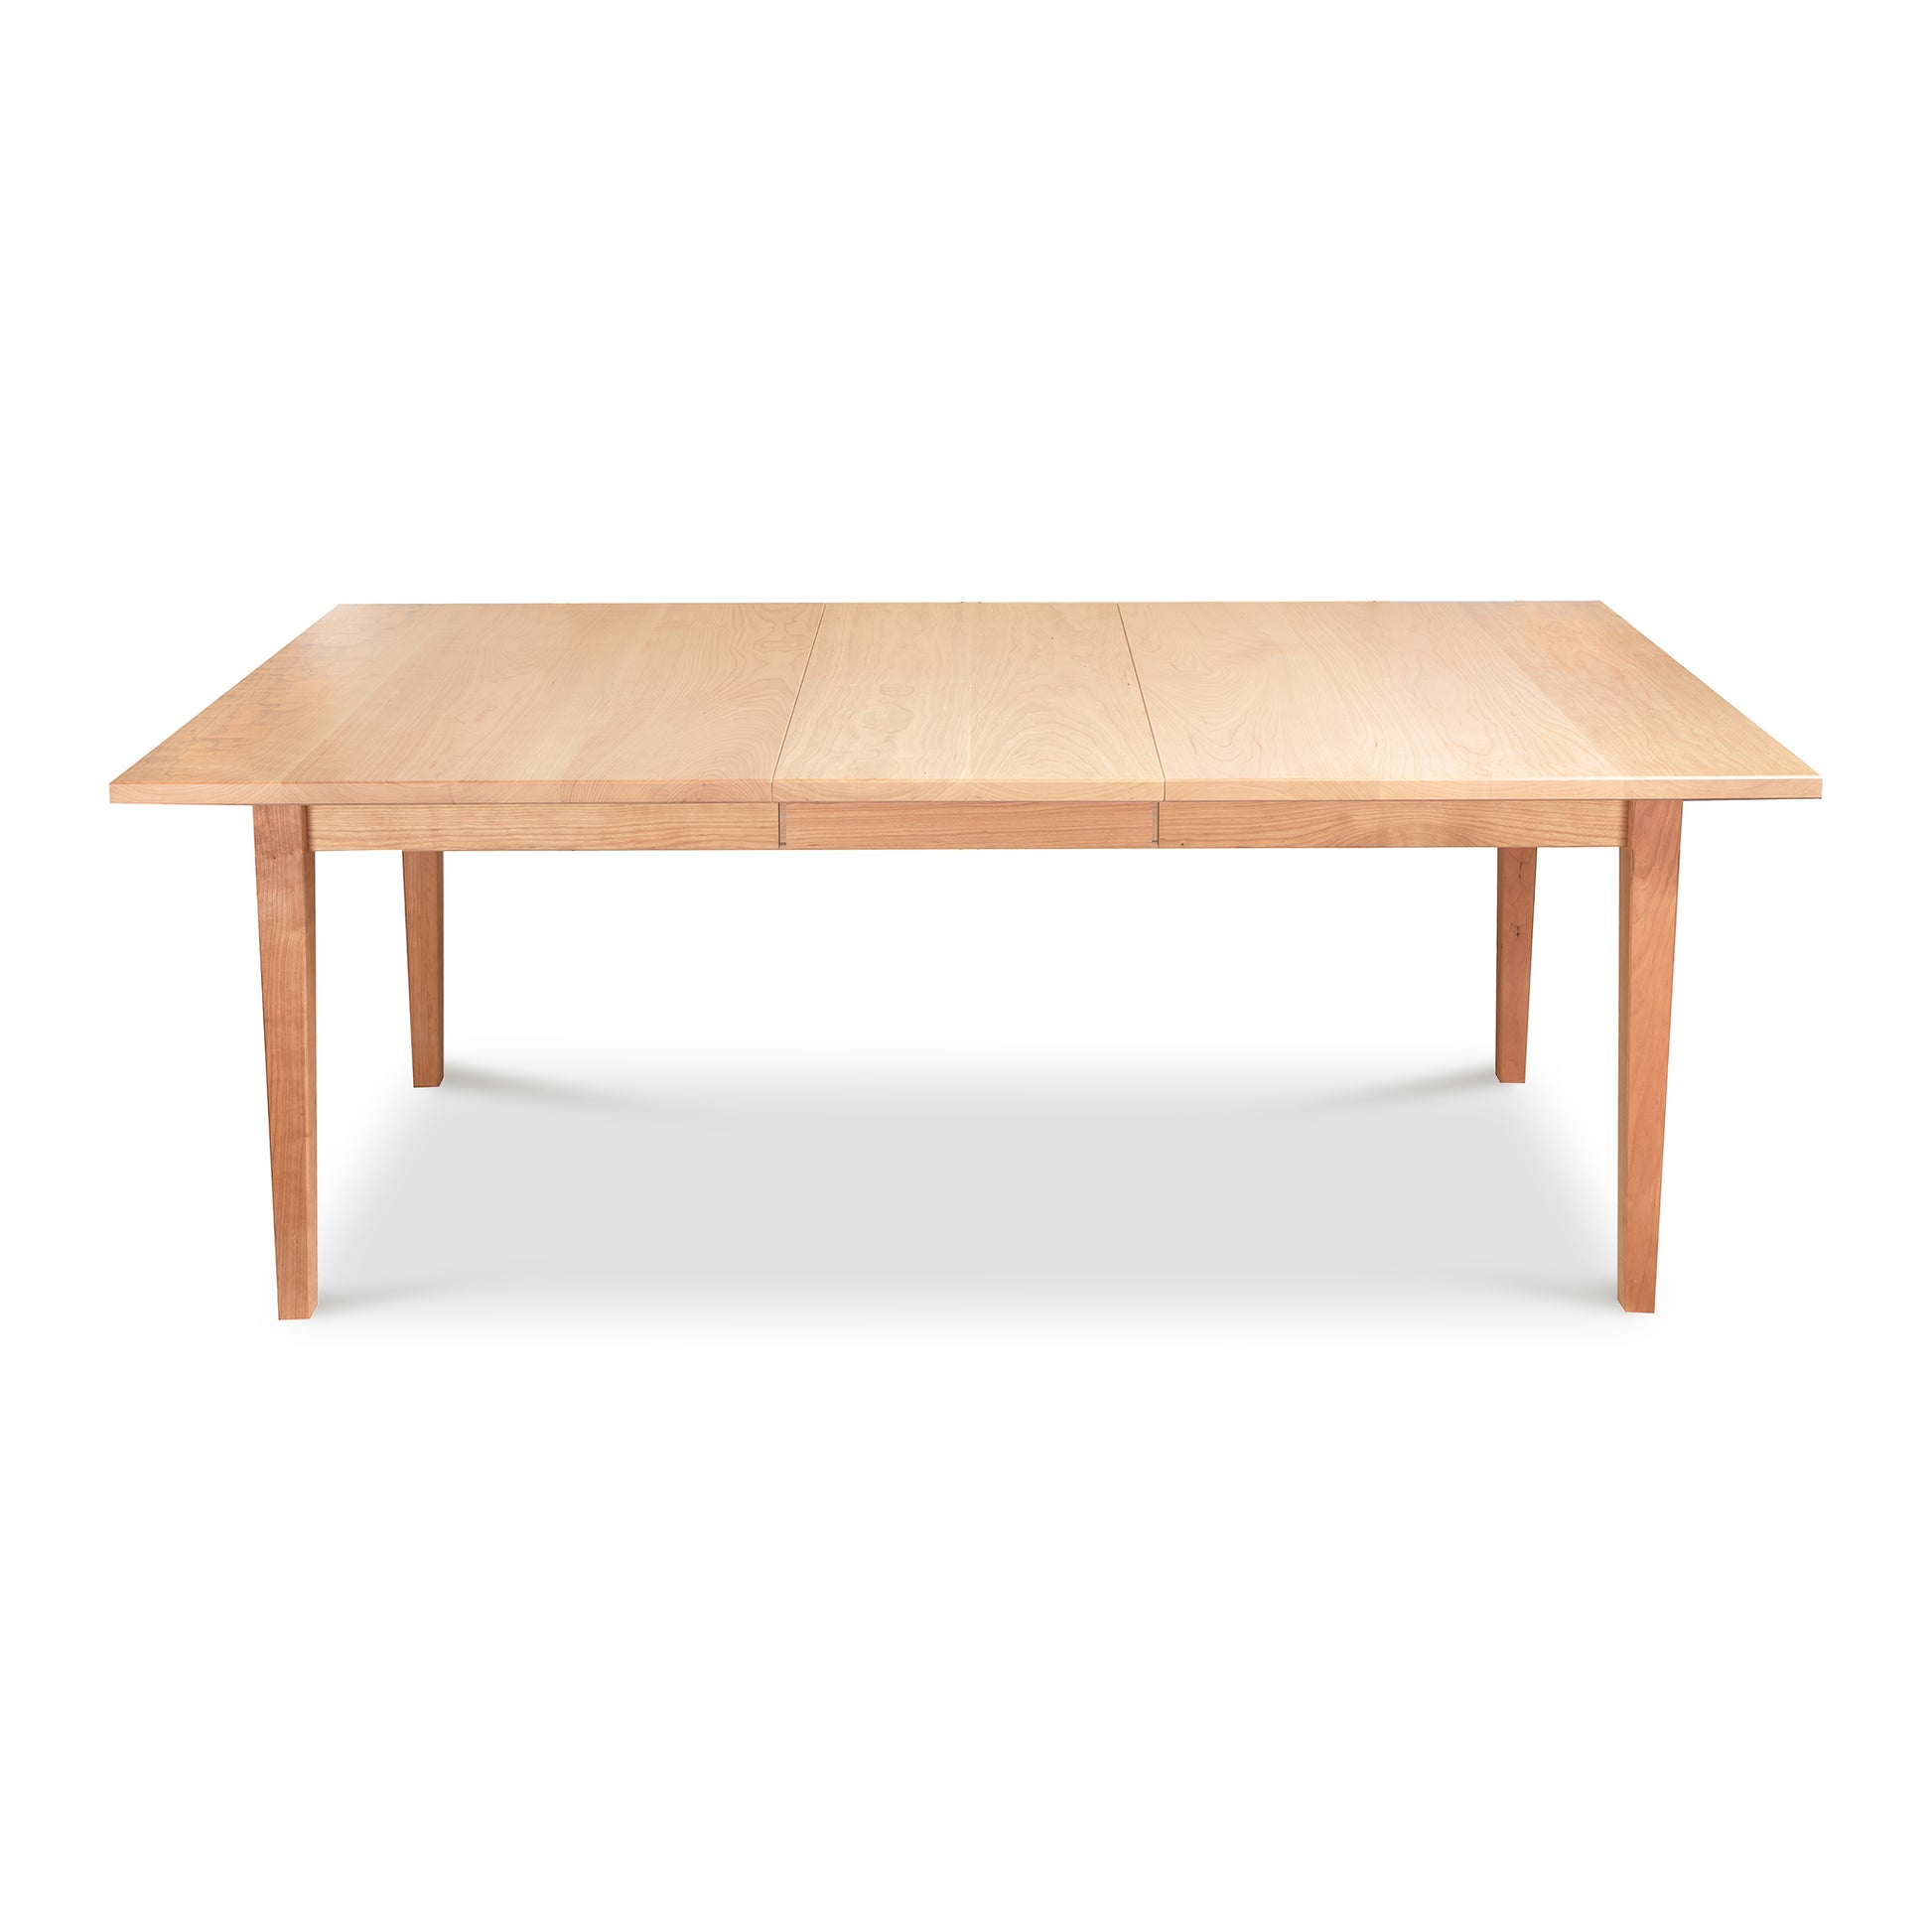 A Vermont Shaker Rectangular Extension Dining Table with a light finish, featuring extendable leaves and simple, straight legs. This sustainably harvested wood table by Maple Corner Woodworks is shown isolated on a white background.